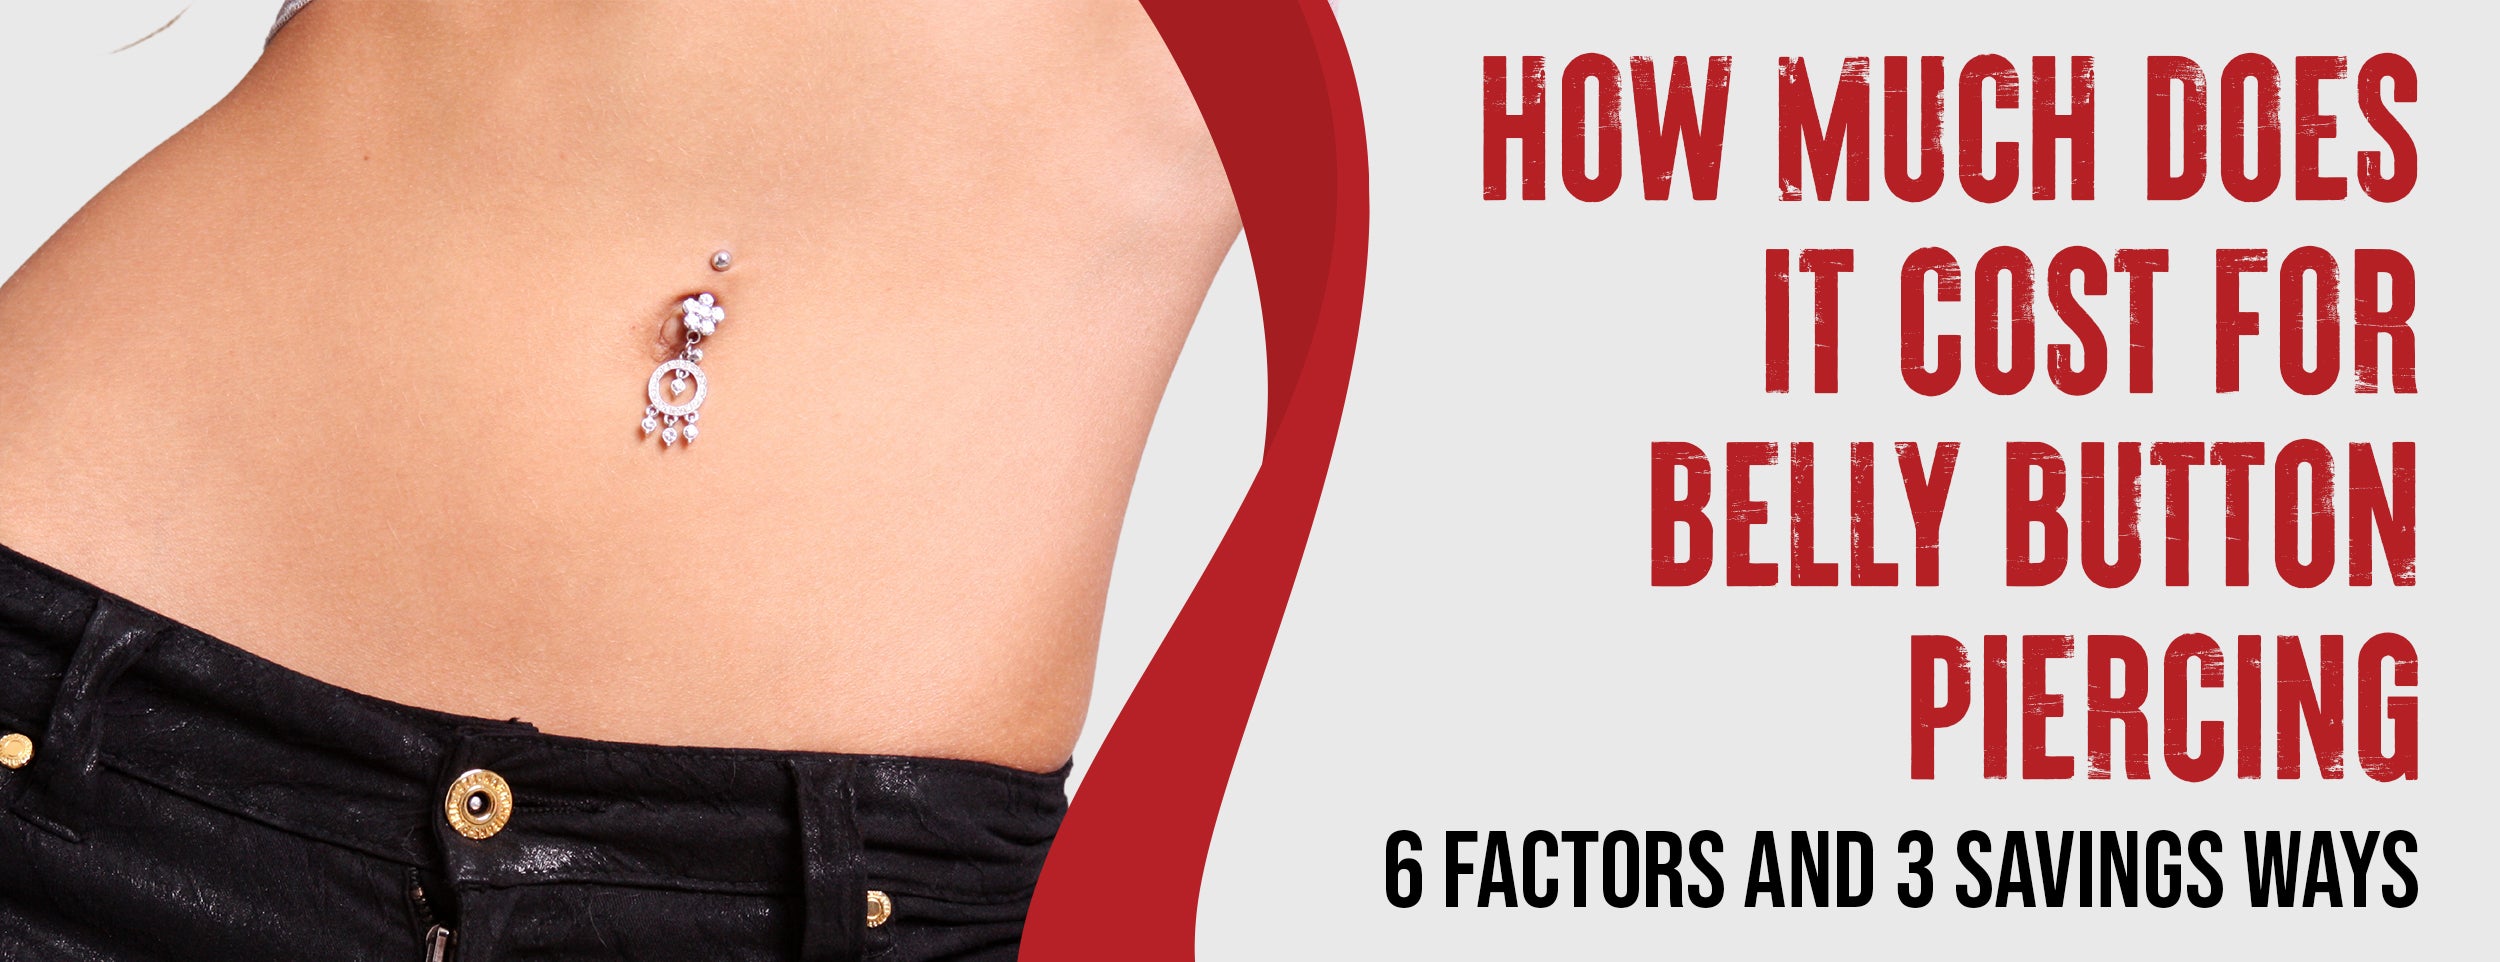 Belly Button Piercing Costs: 6 Factors and 3 Savings Options